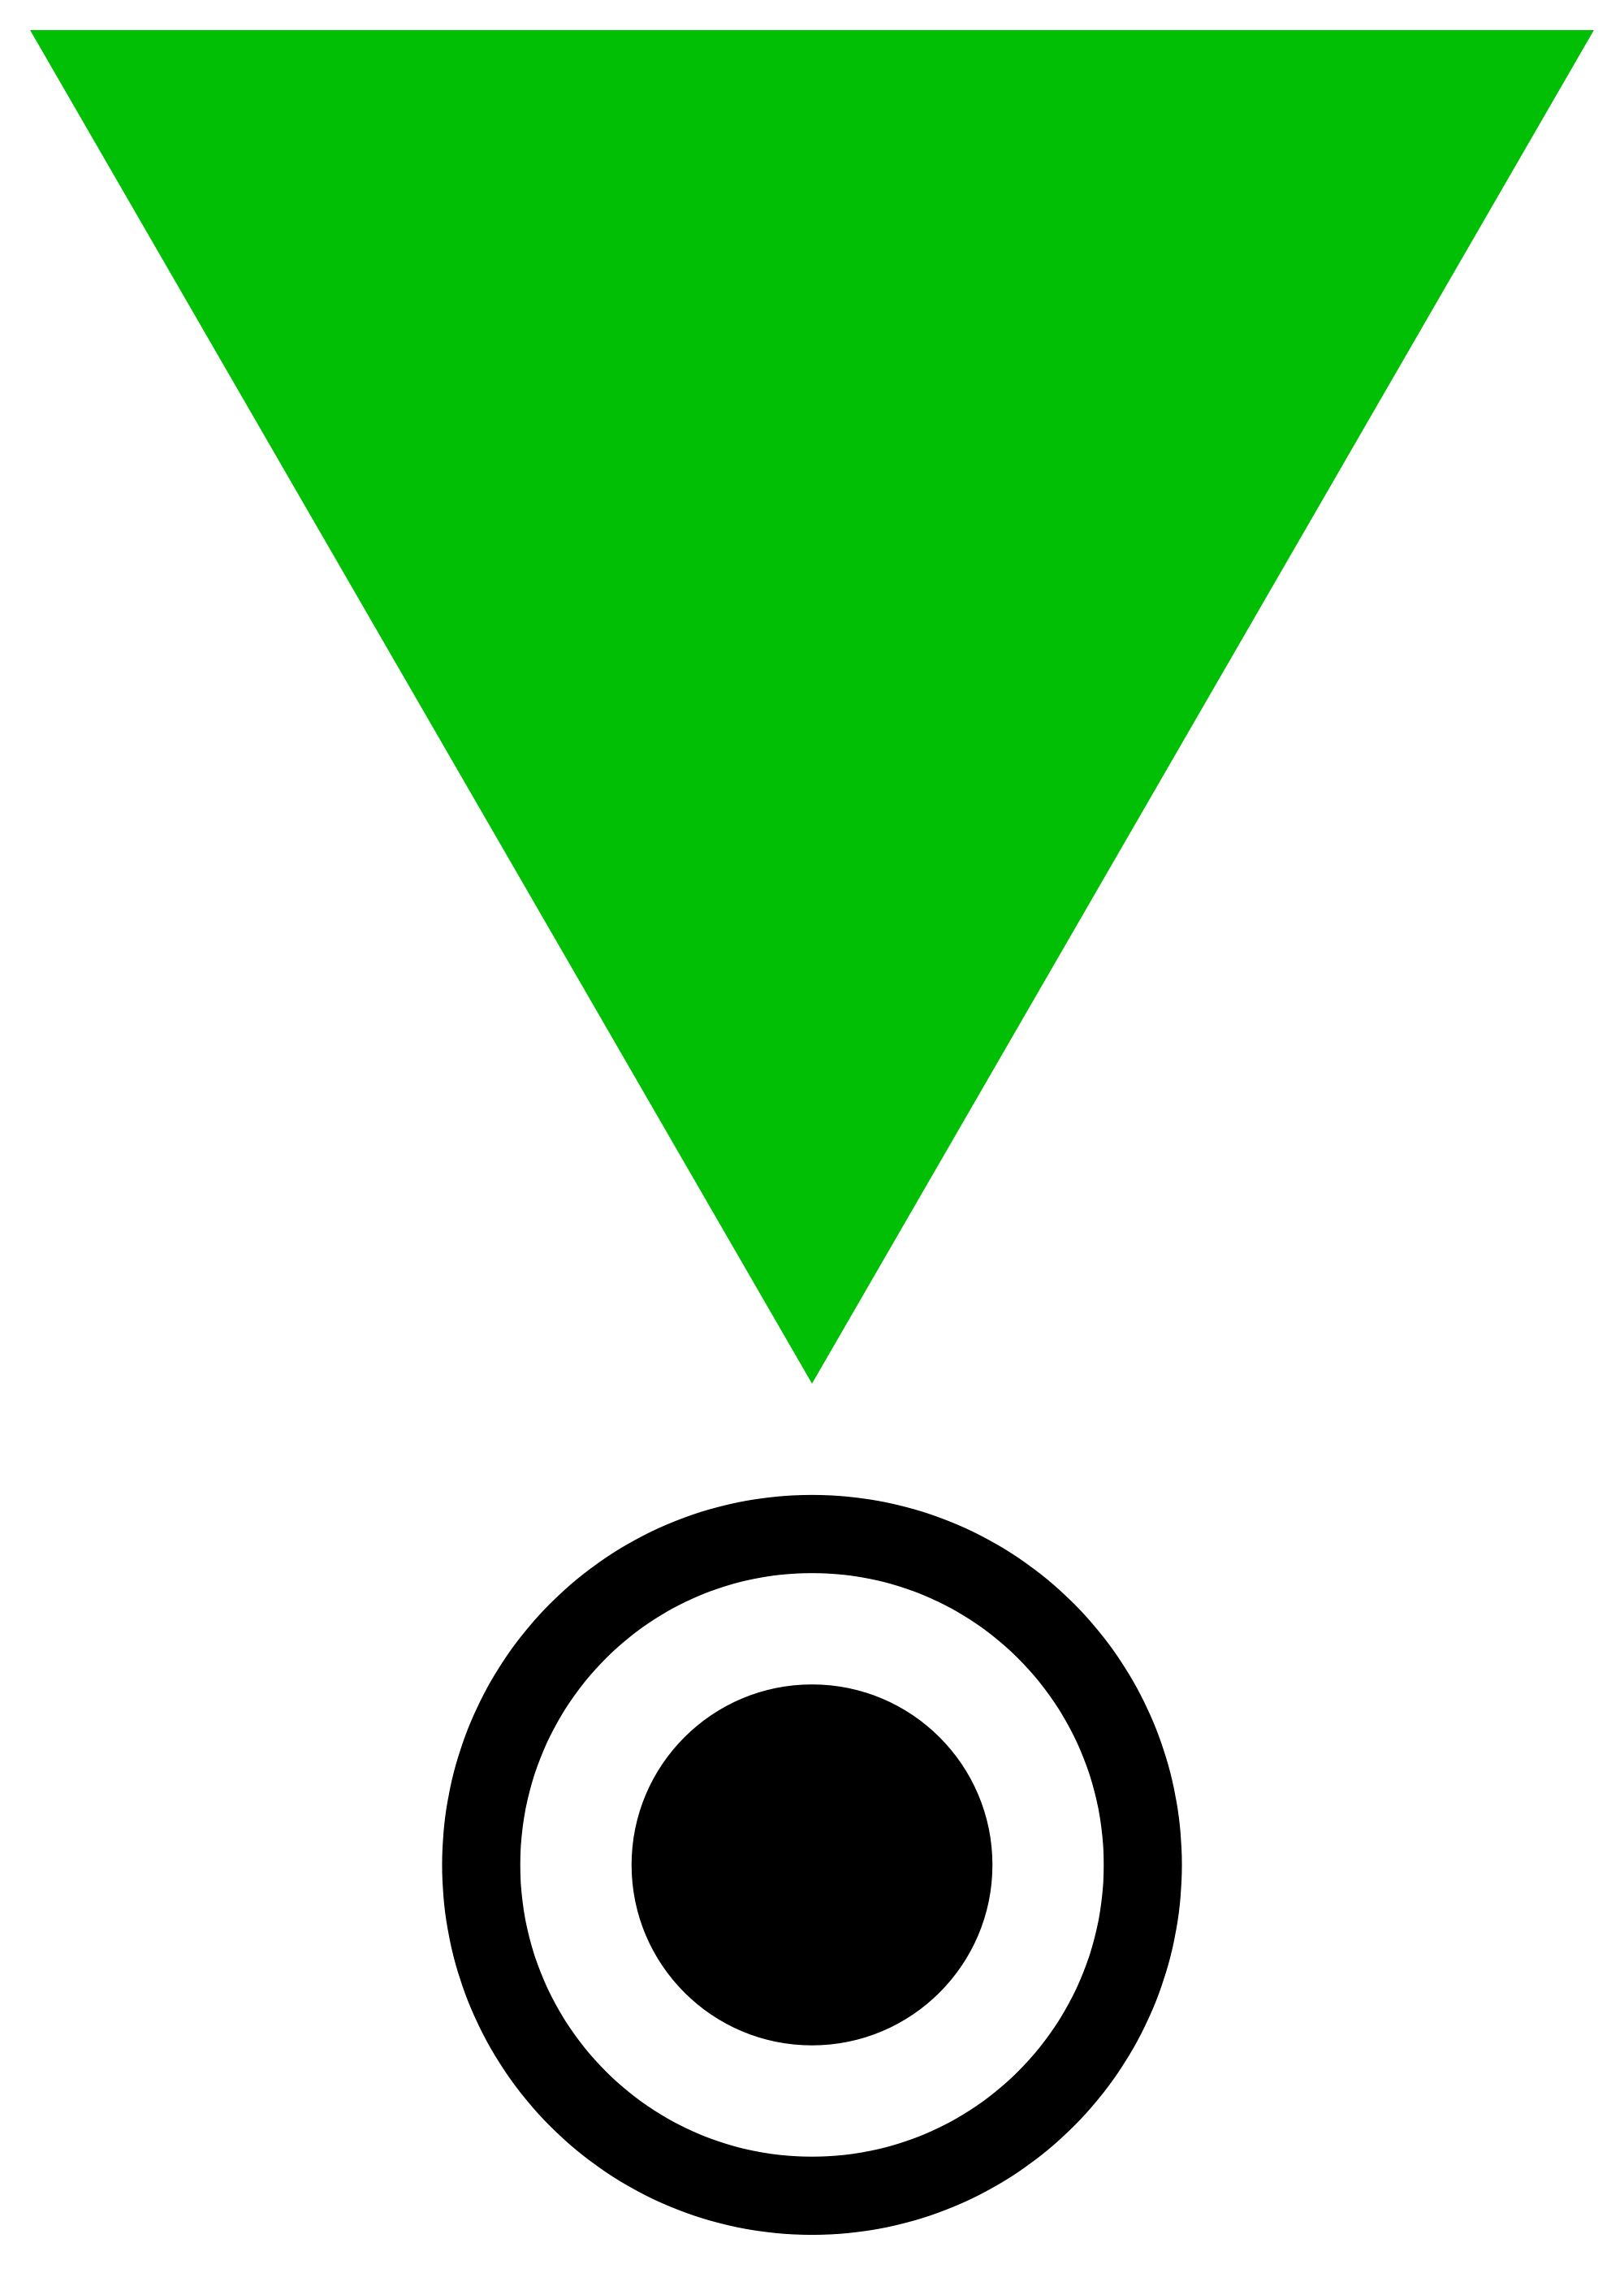 Triangles in Green Circle Logo - File:Green triangle penal.svg - Wikimedia Commons